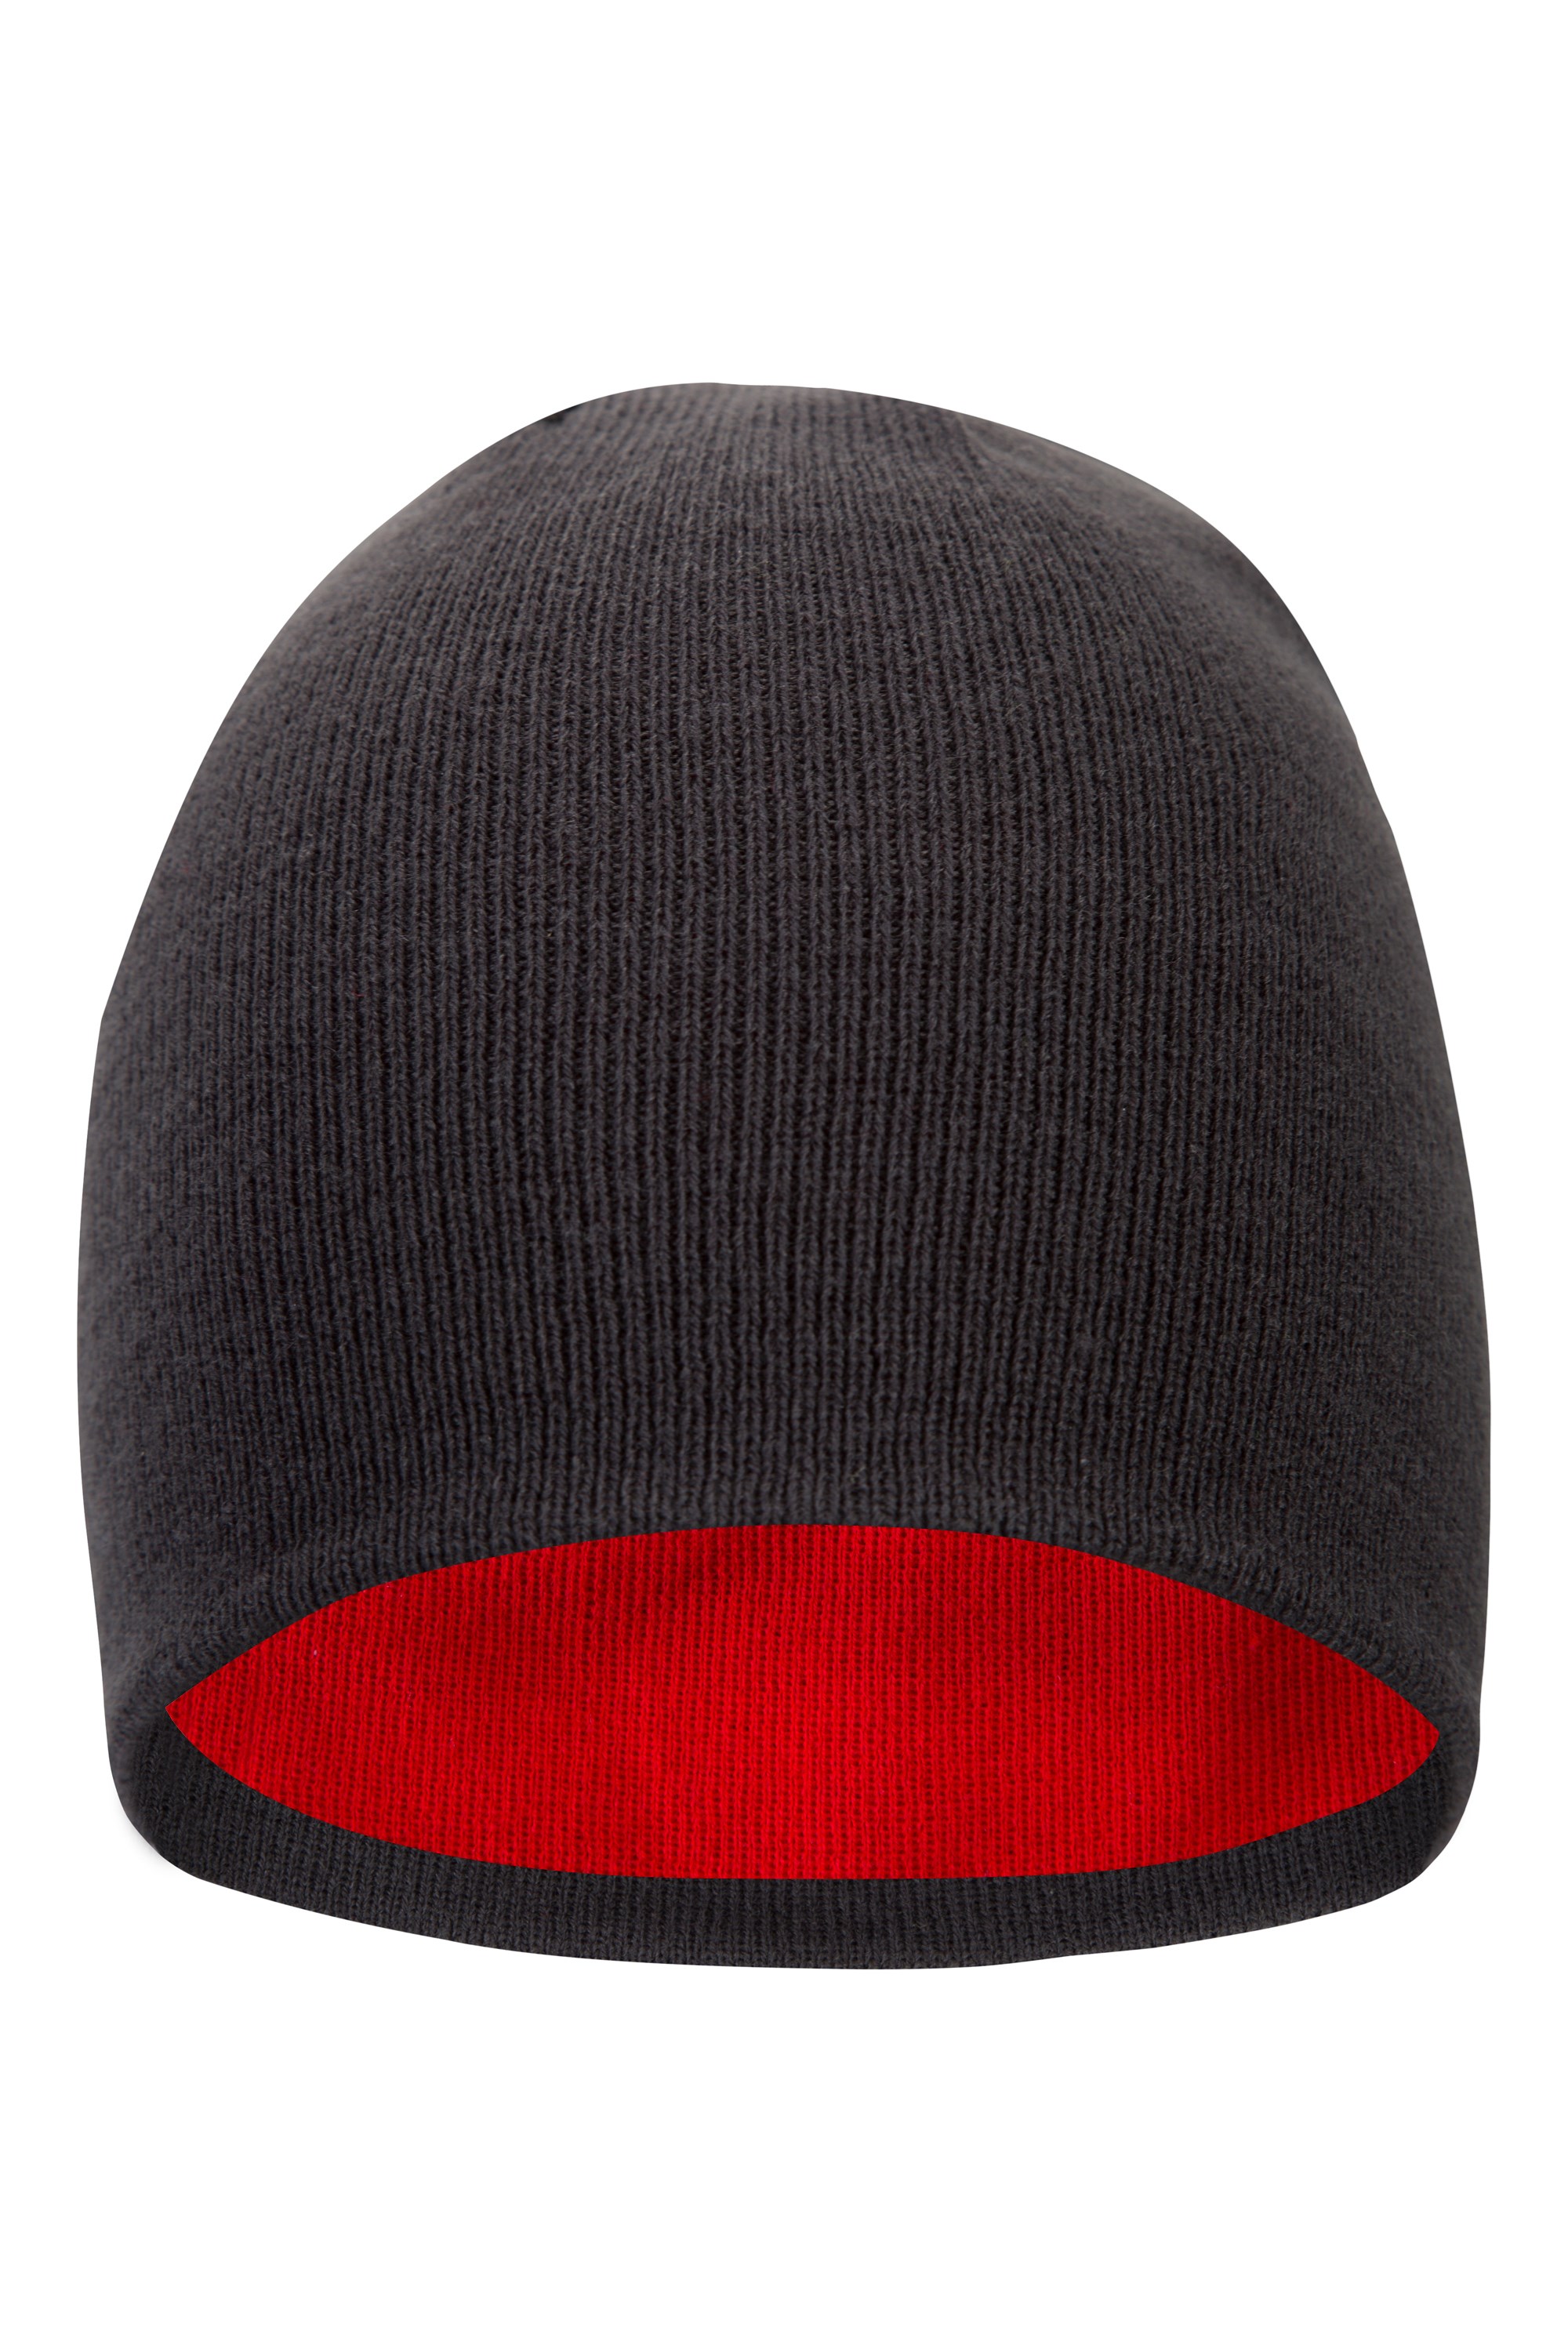 Mountain Warehouse St Anton Beanie and Versatile for Extra Warmth and Comfort 